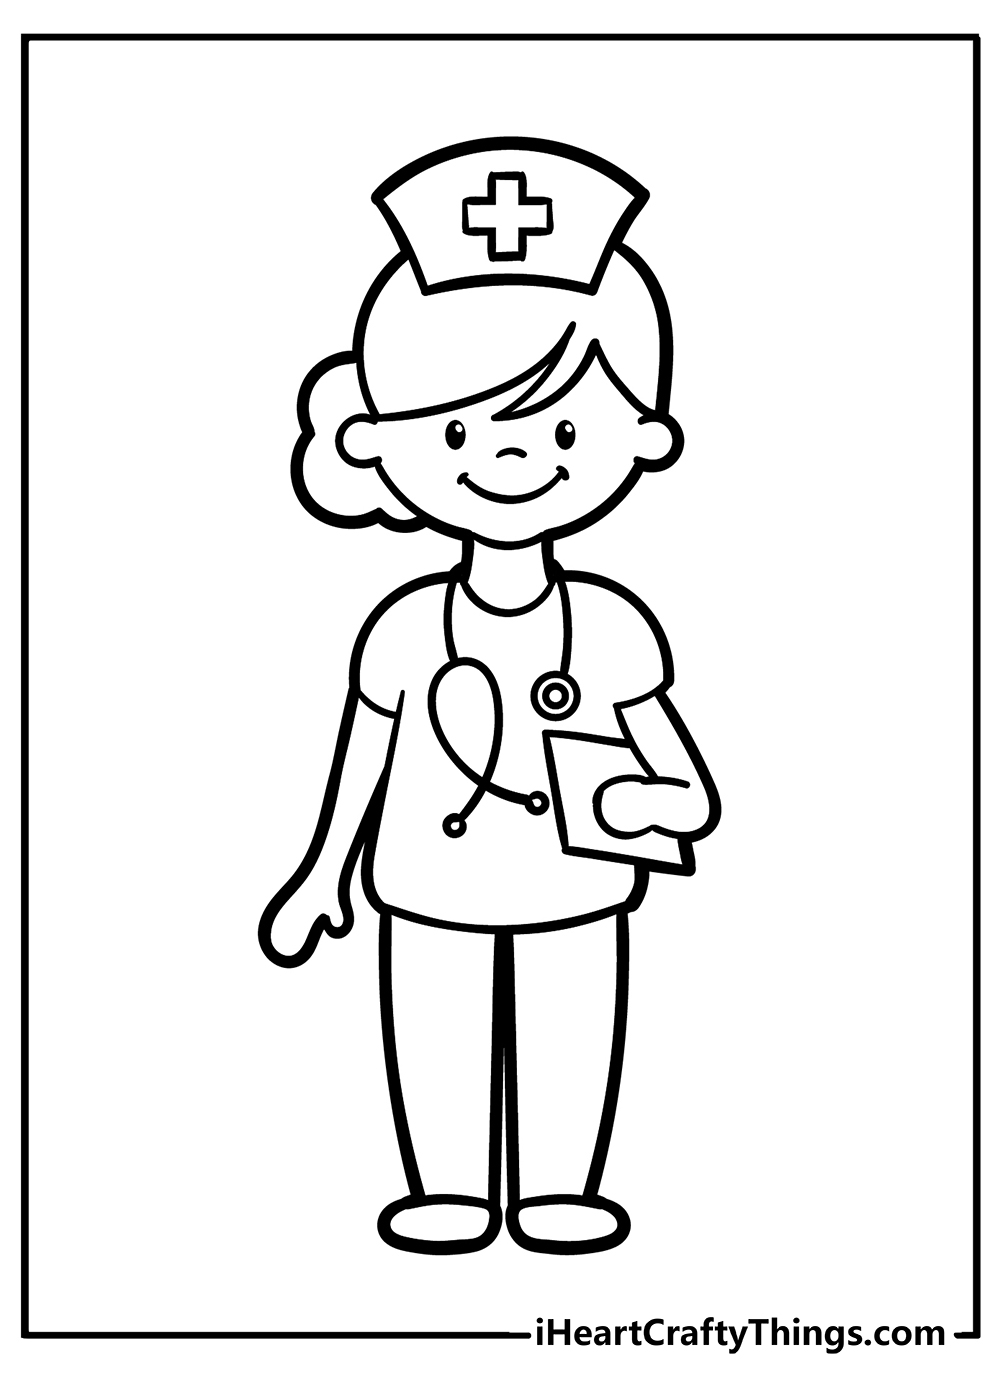 Nurse Coloring Pages for kids free download